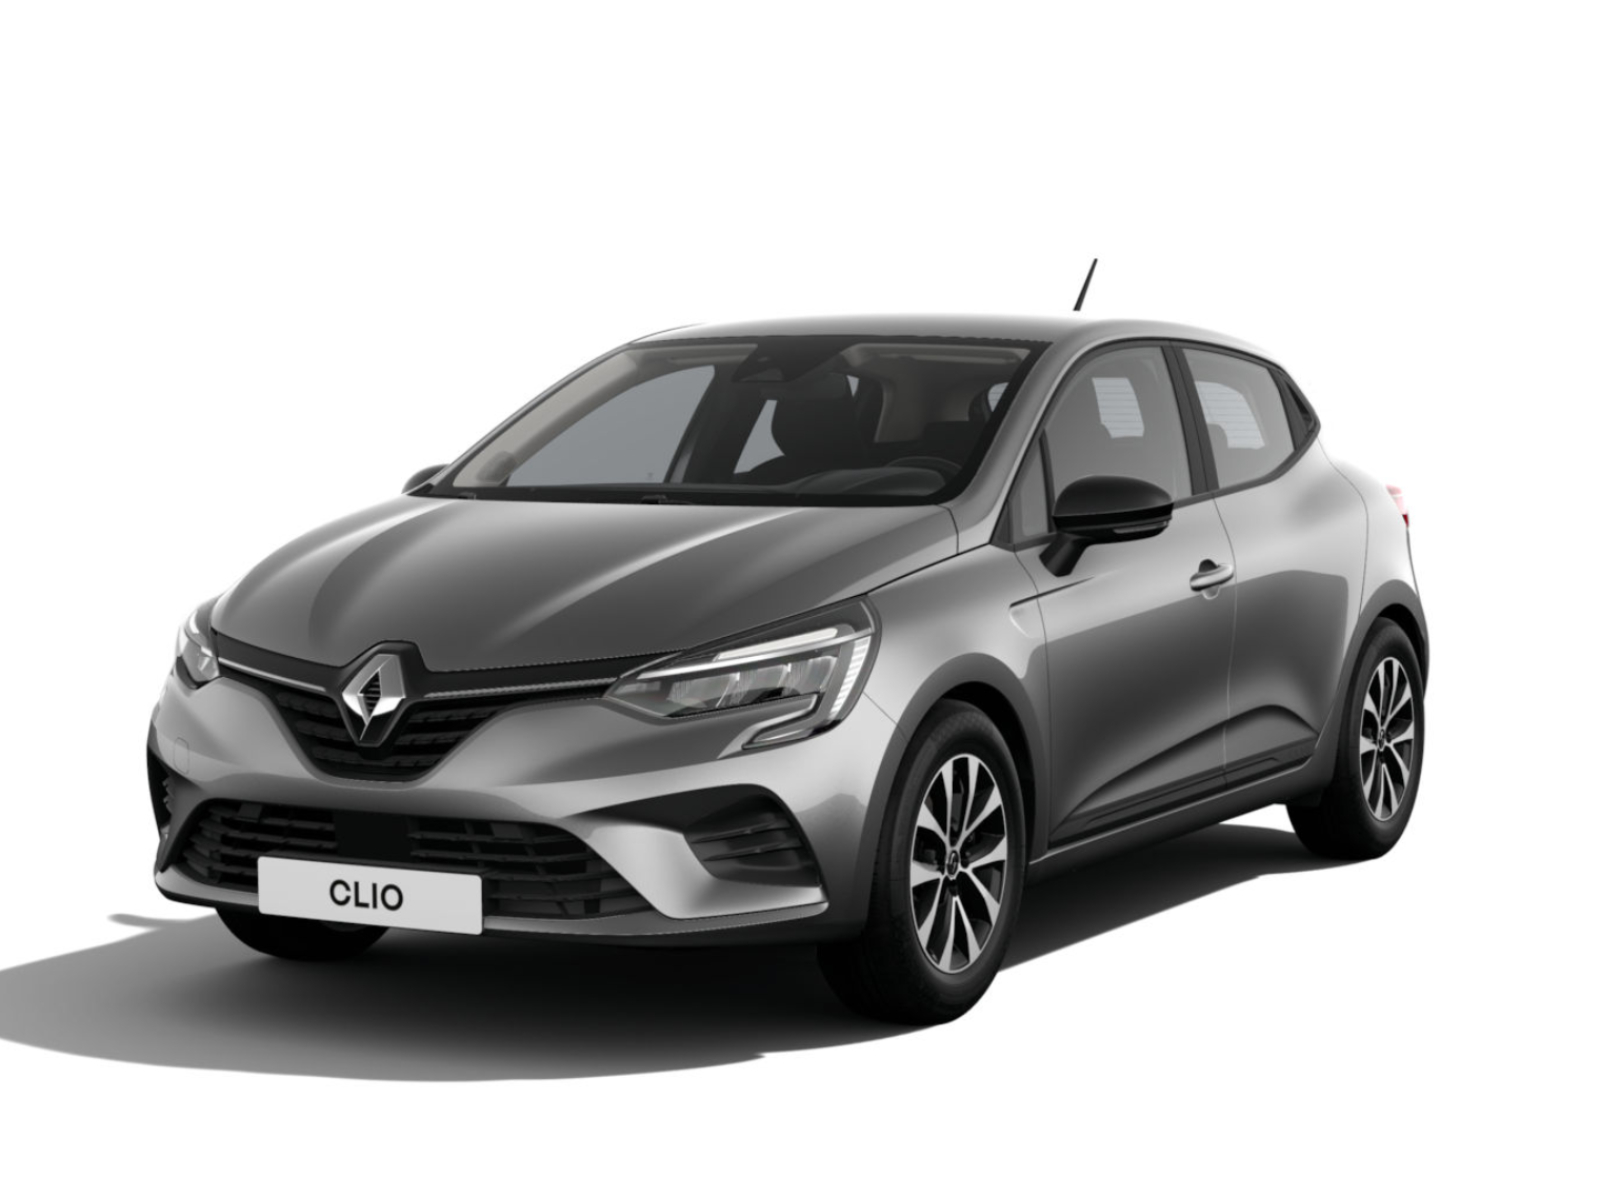 Renault Clio 1.0 TCe 90 GPF Equilibre 5d.